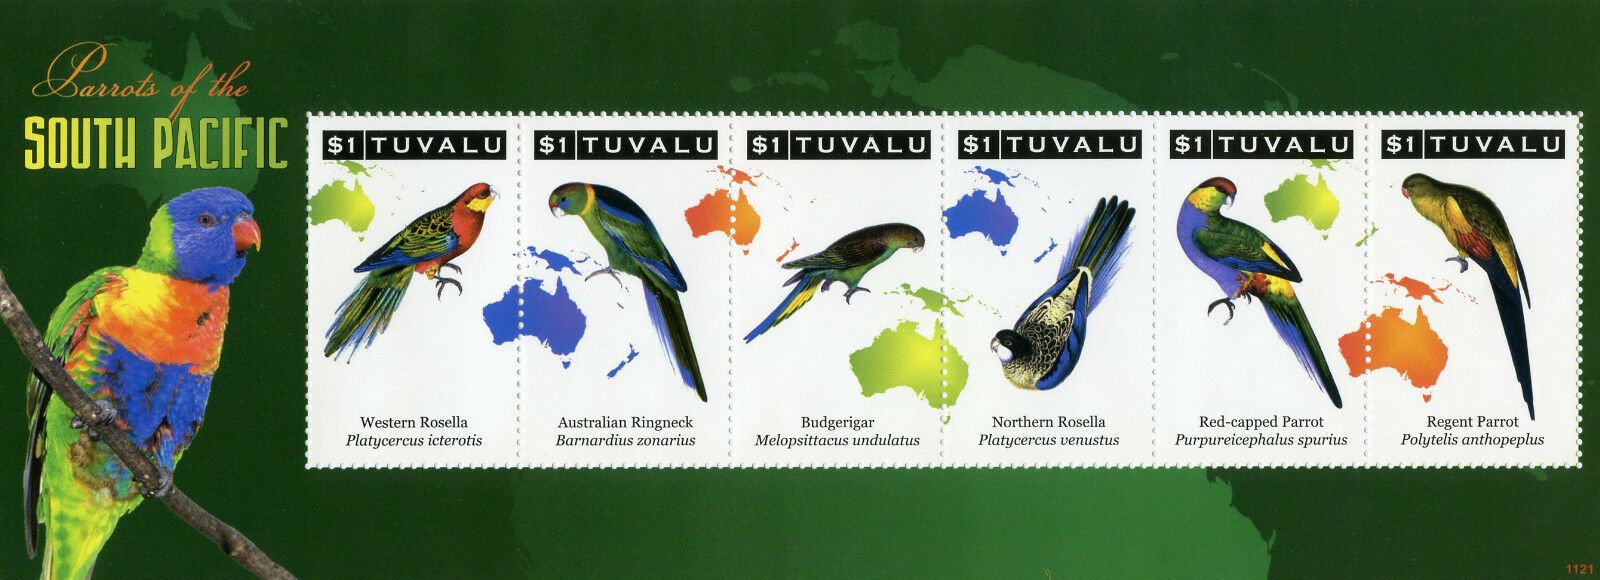 Tuvalu 2011 MNH Birds on Stamps Parrots of South Pacific Rosella Budgerigar 6v M/S